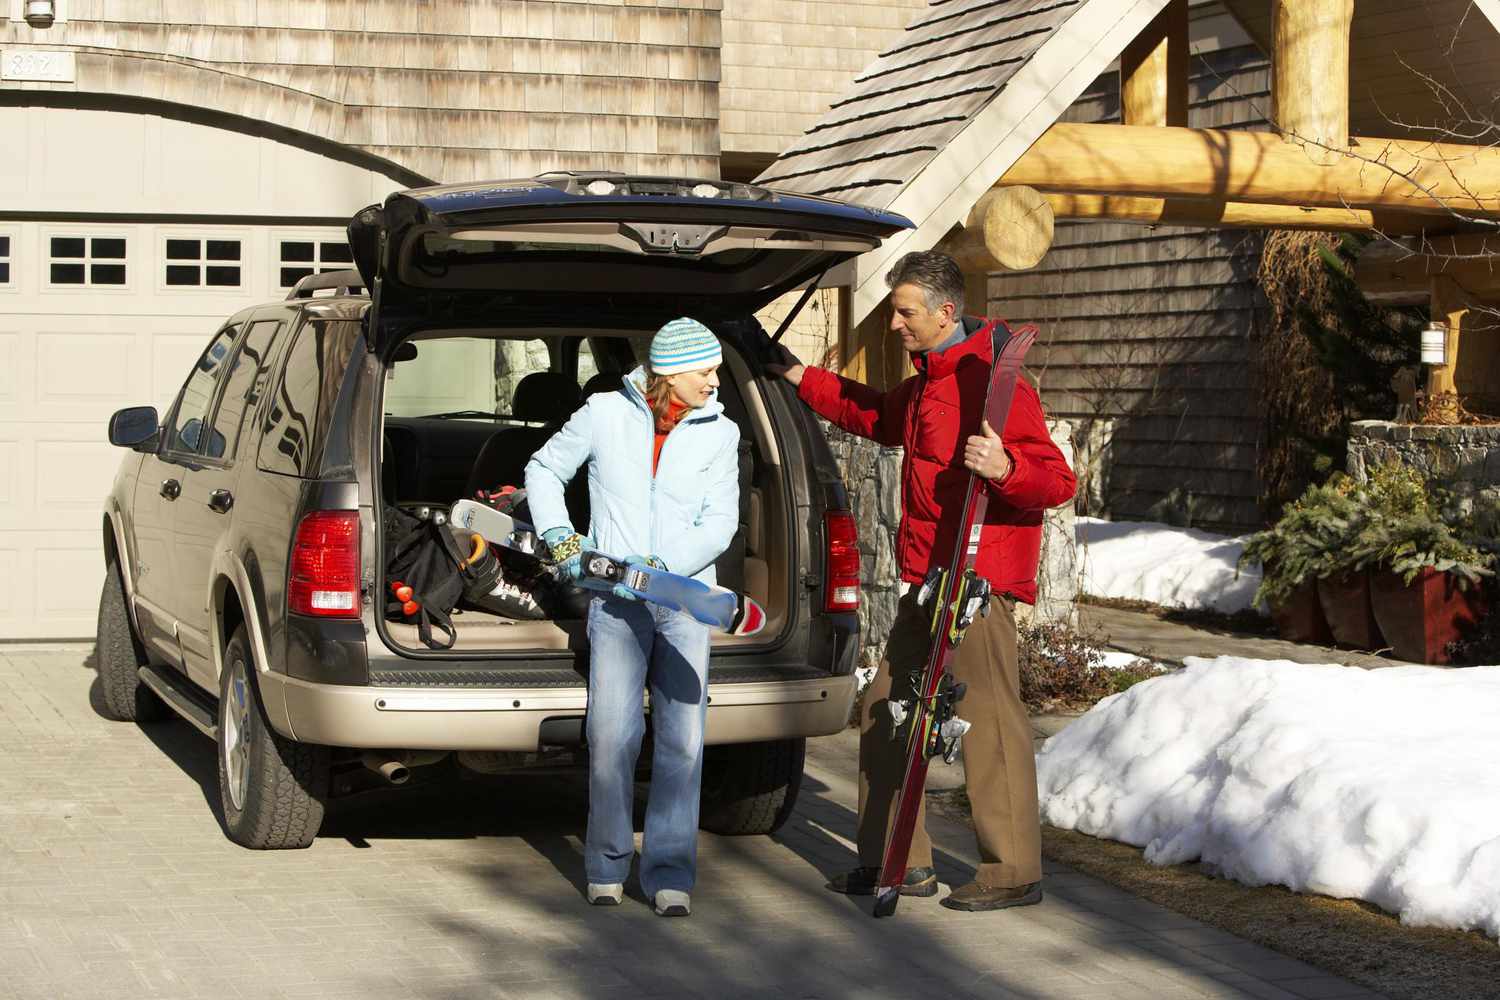 Couple loading car to go skiing